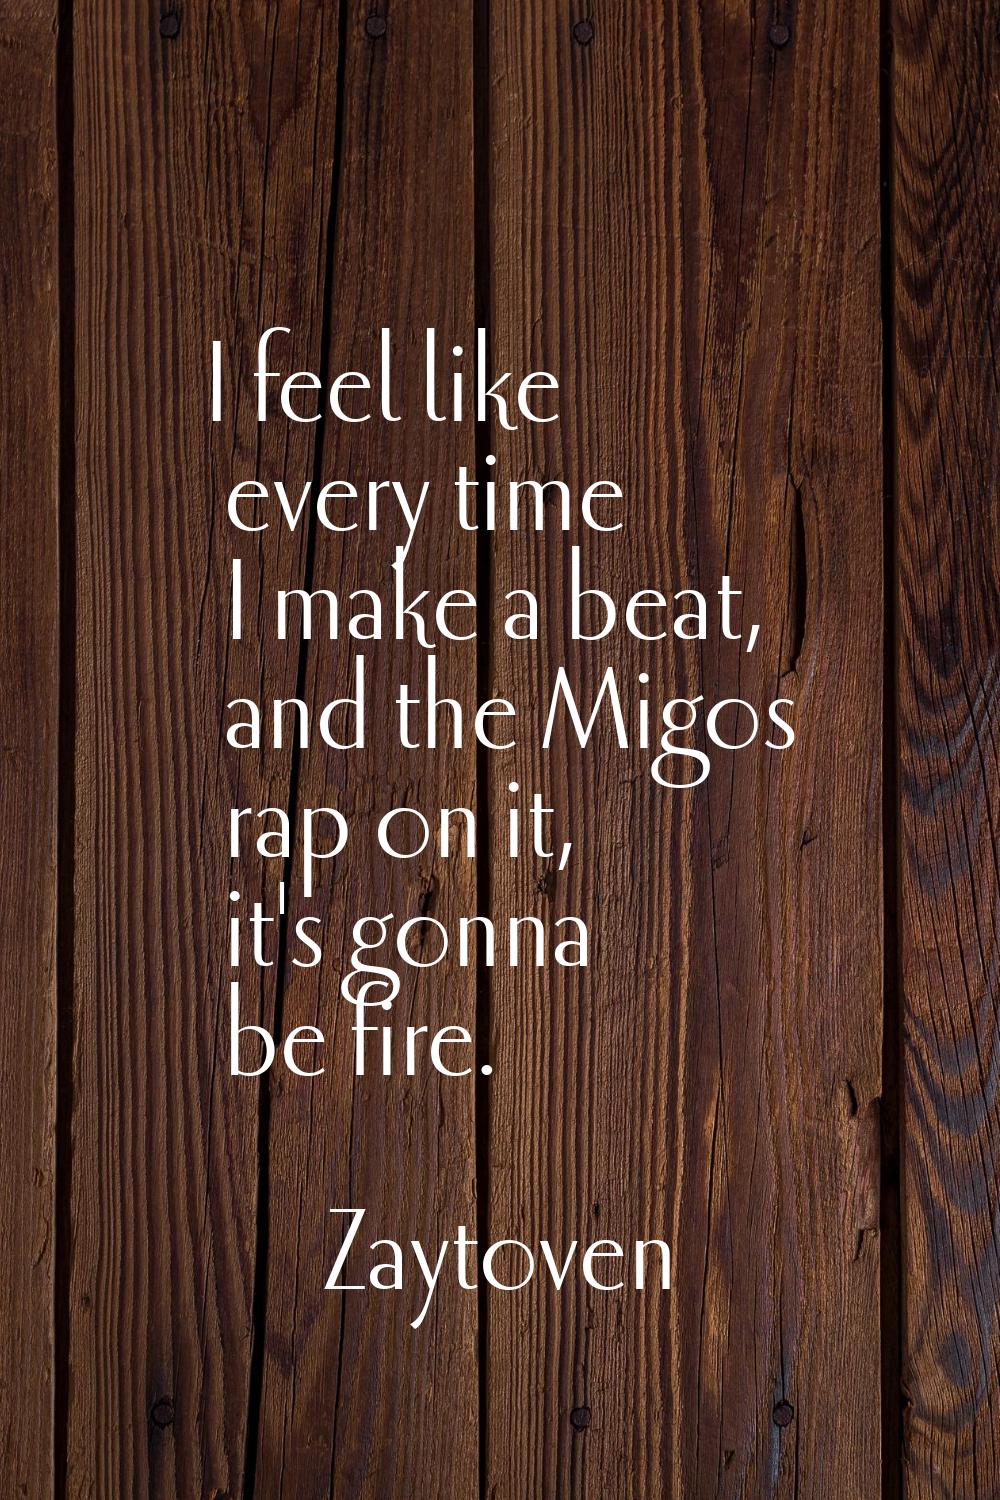 I feel like every time I make a beat, and the Migos rap on it, it's gonna be fire.